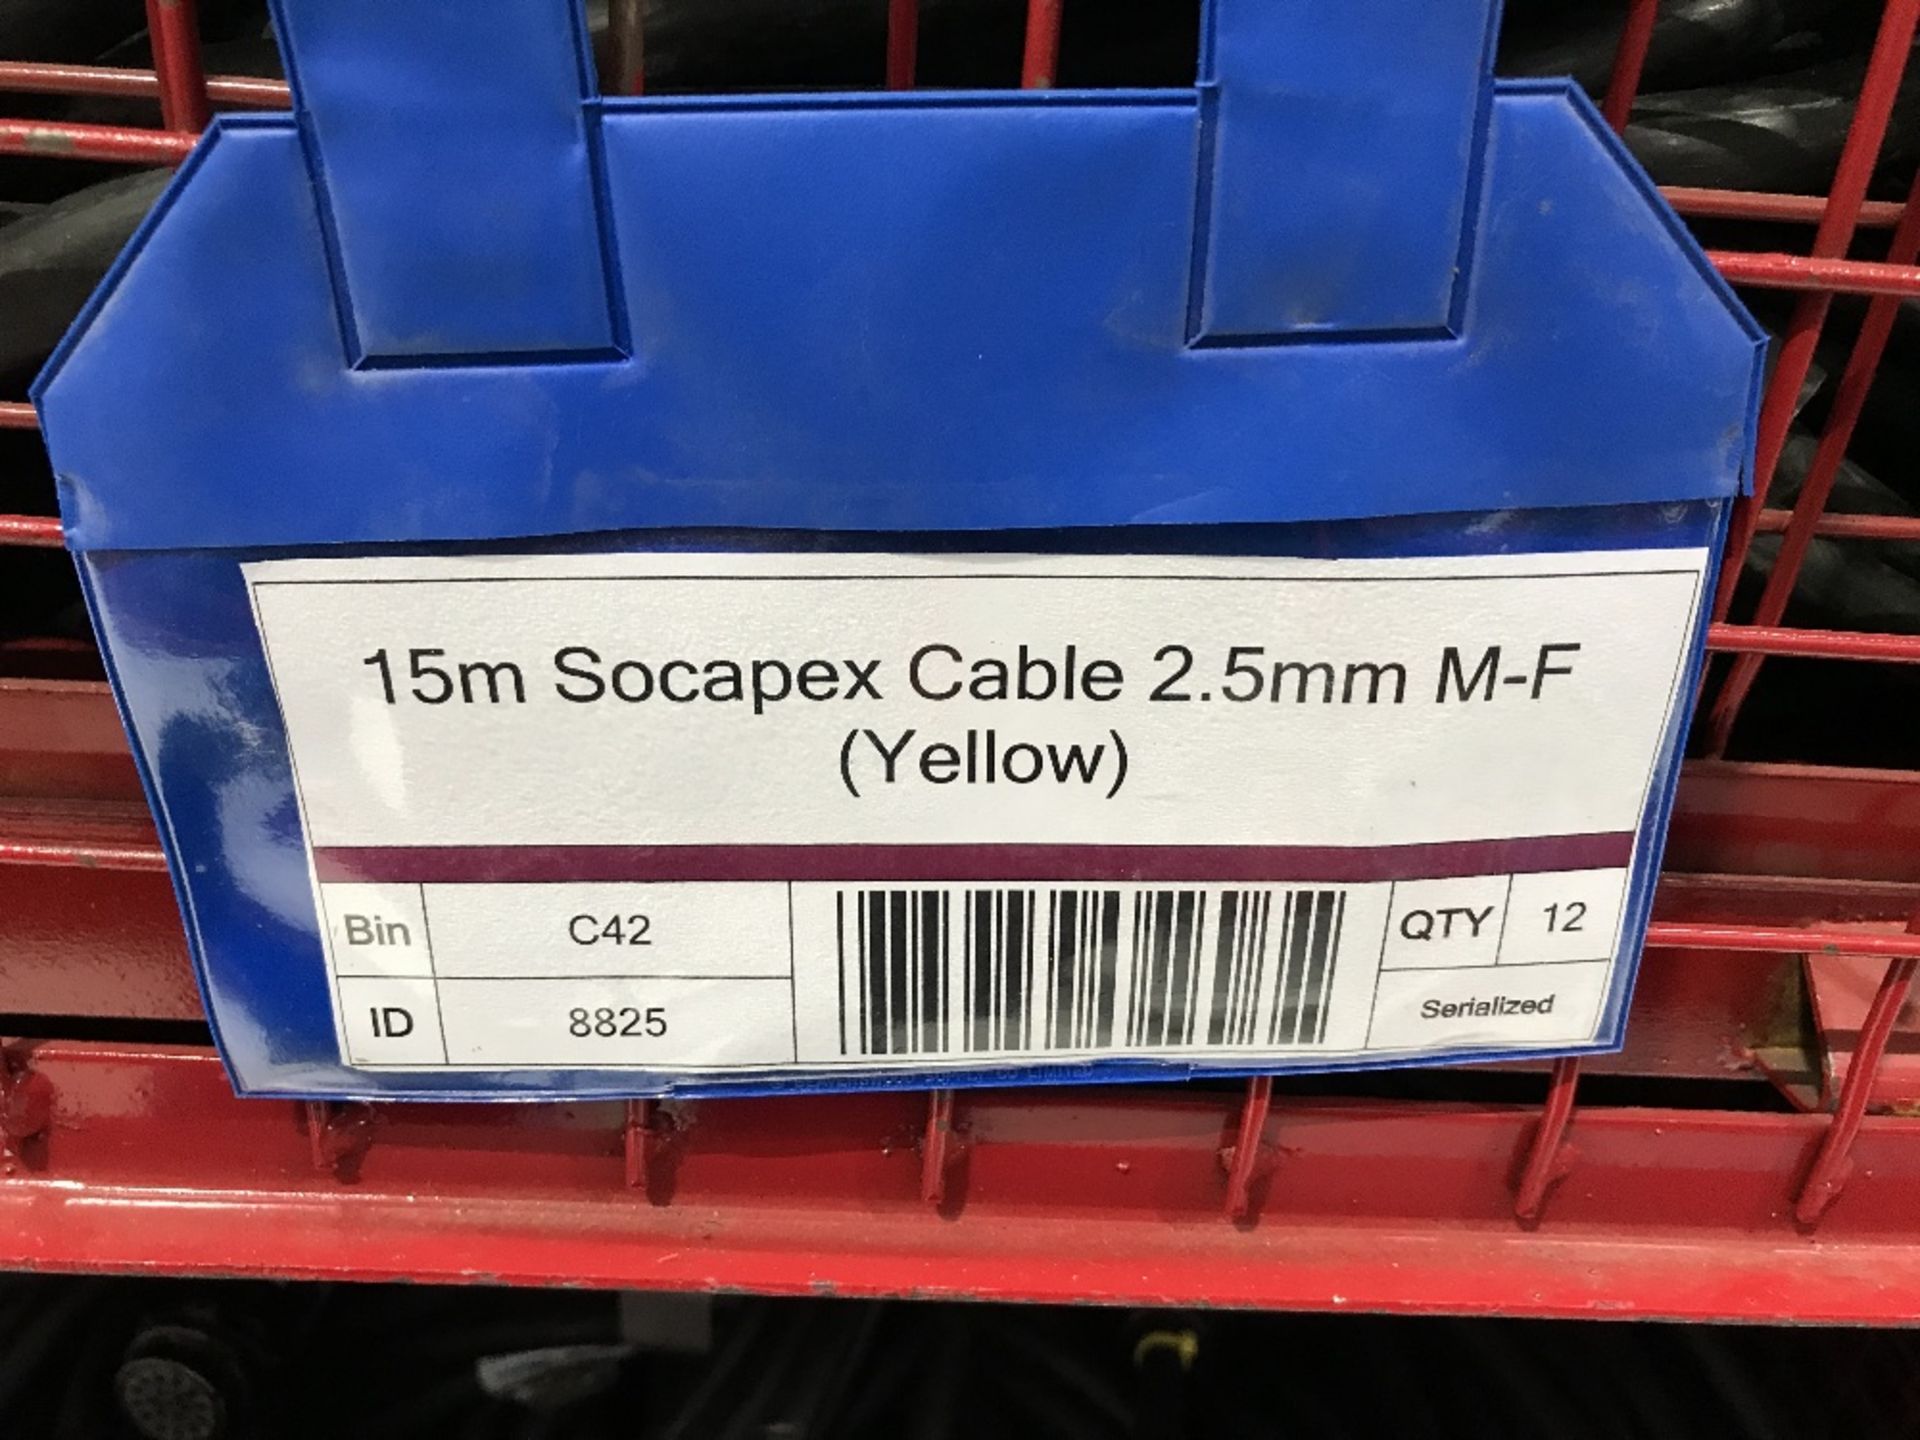 Large Quantity of 15m Socapex 2.5mm Cable with Steel Fabricated Stillage